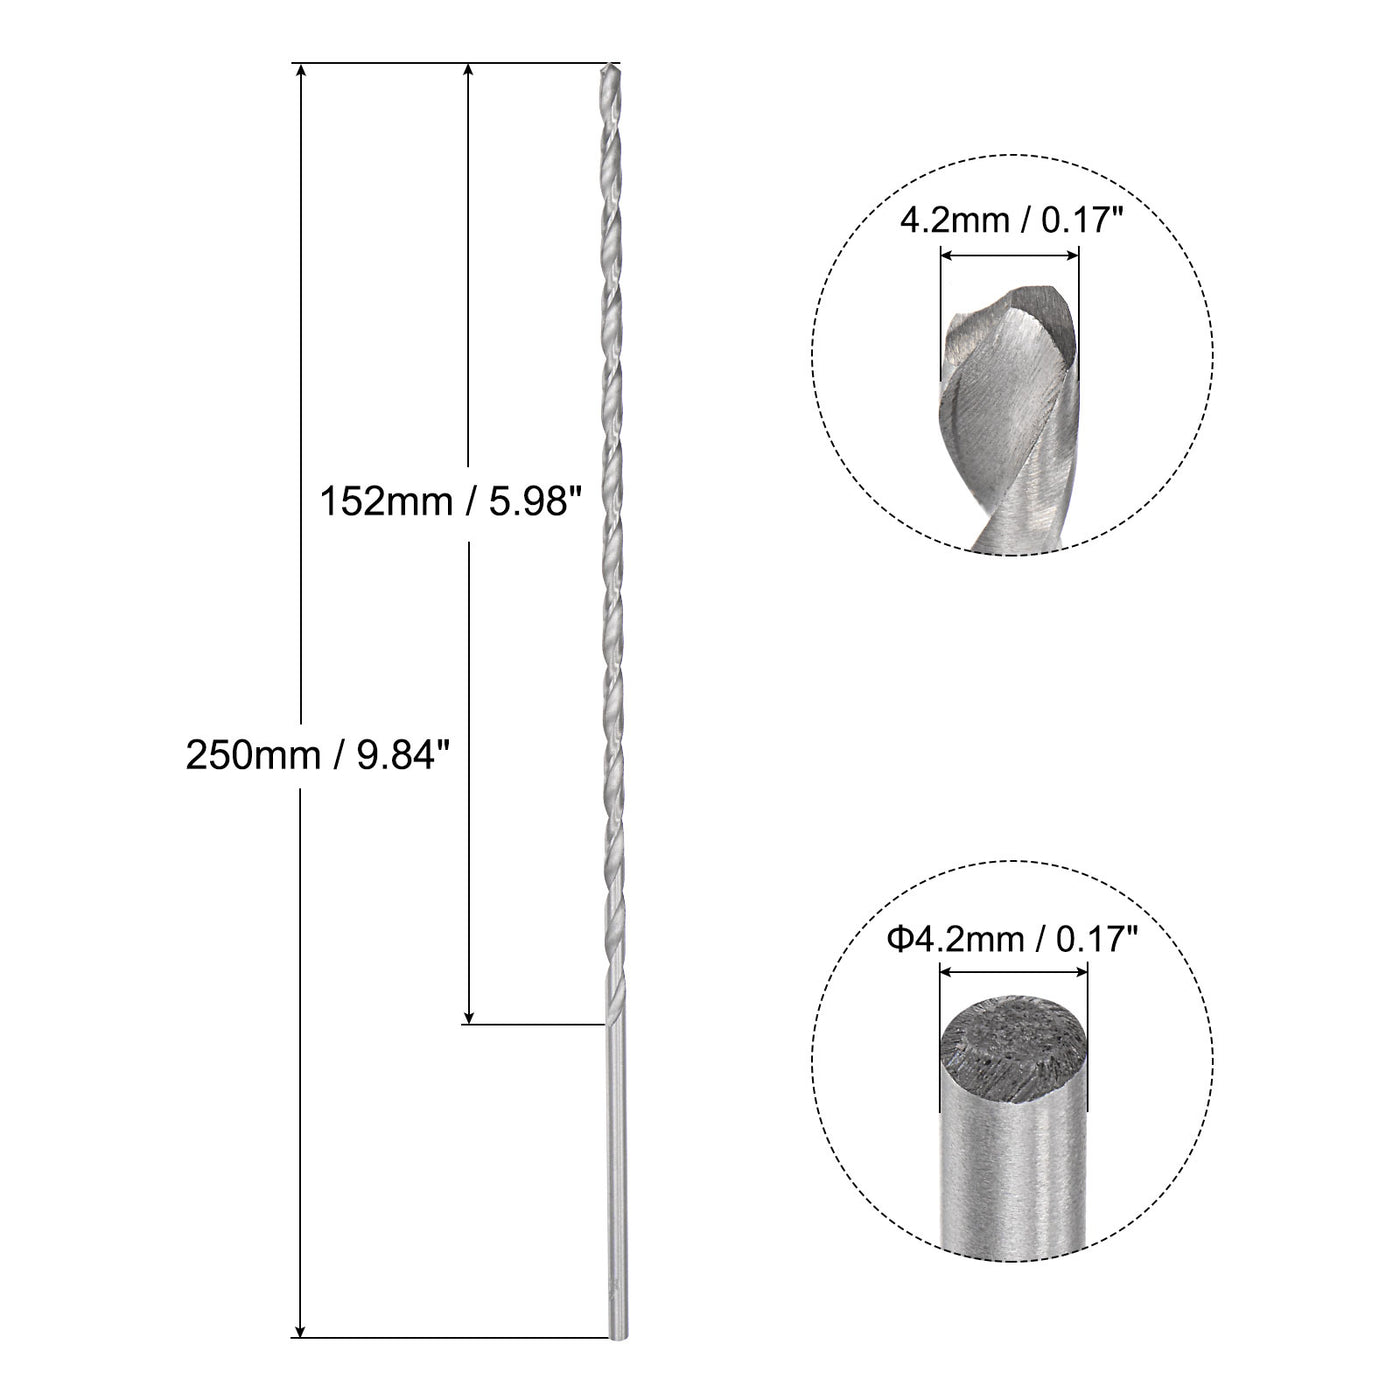 uxcell Uxcell 4.2mm Twist Drill Bits, High-Speed Steel Extra Long Drill Bit 250mm Length